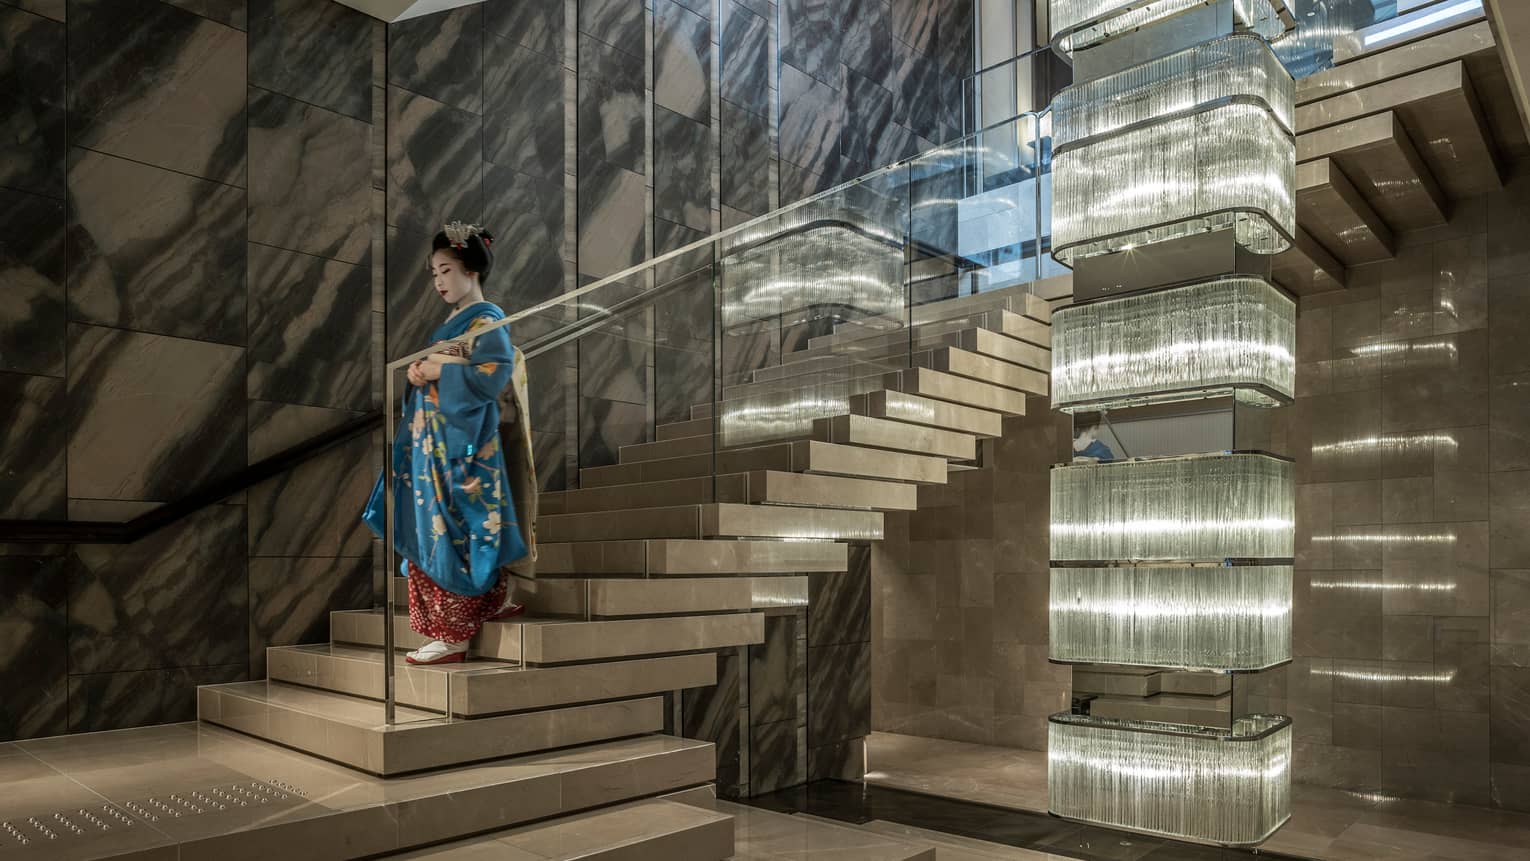 Geisha wearing traditional kimono, make-up descends down marble and glass staircase